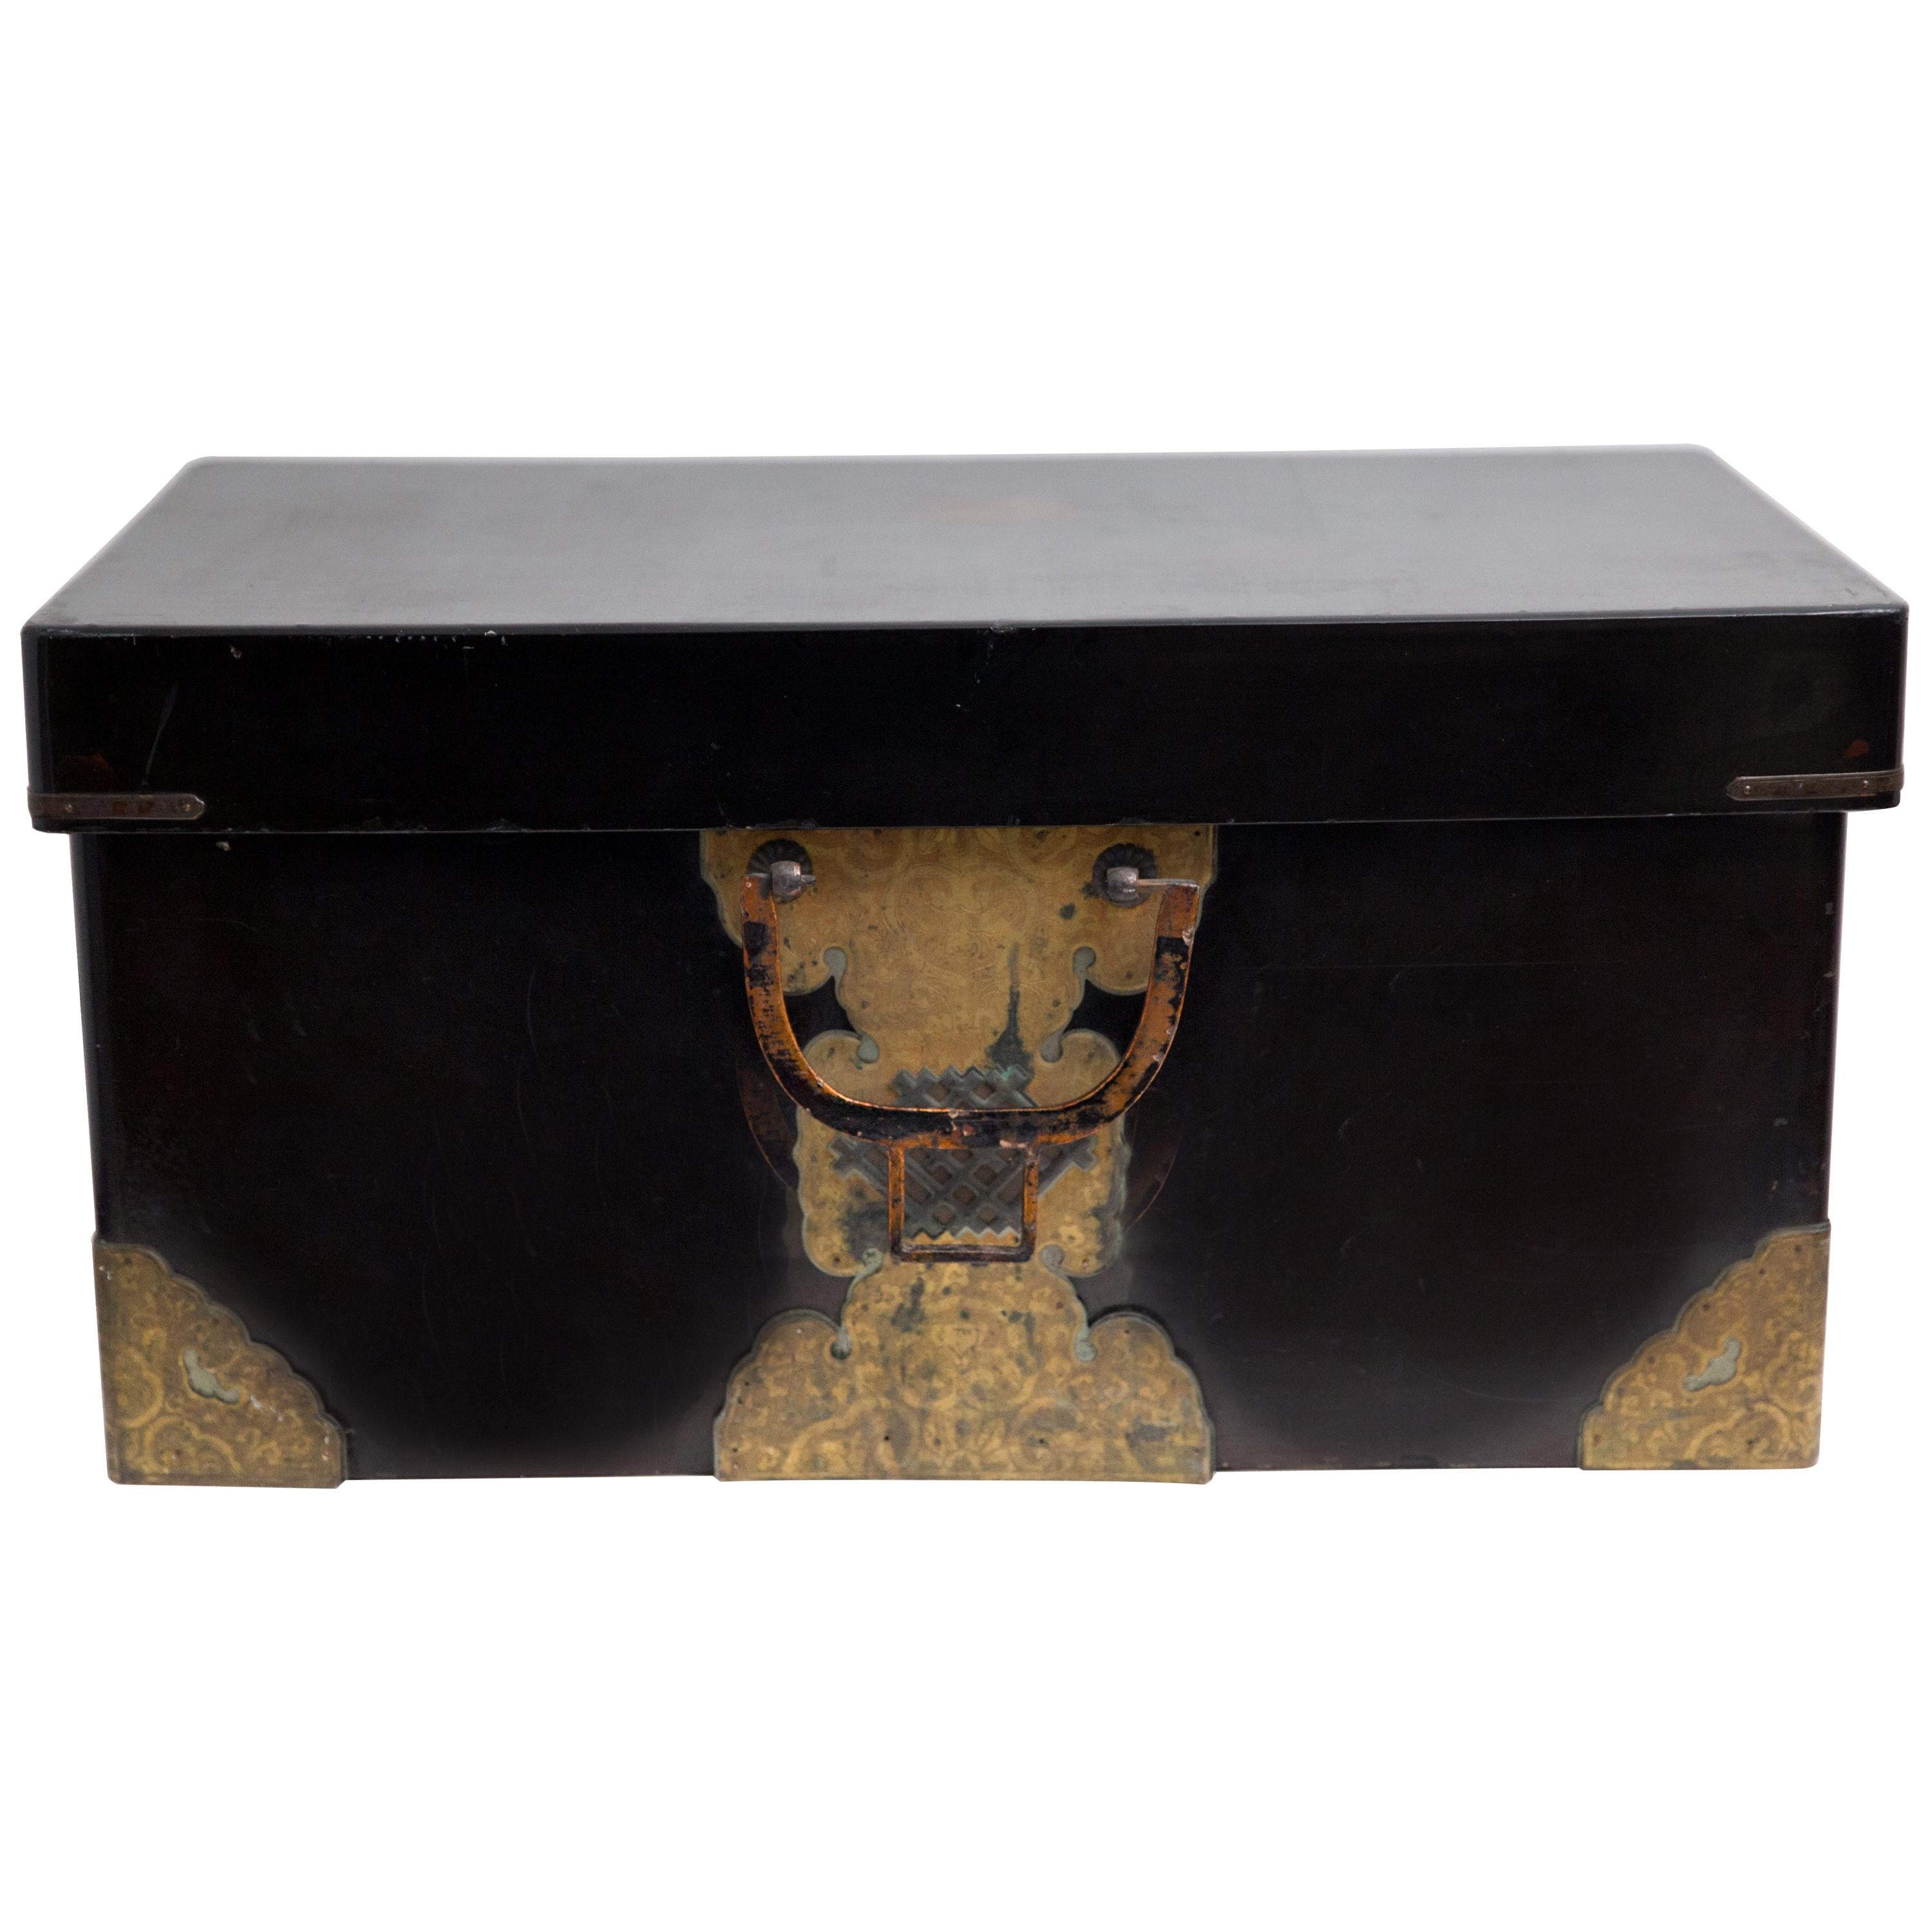 Japanese Meiji Brass Decorated Lacquered Wood Traveling Chest